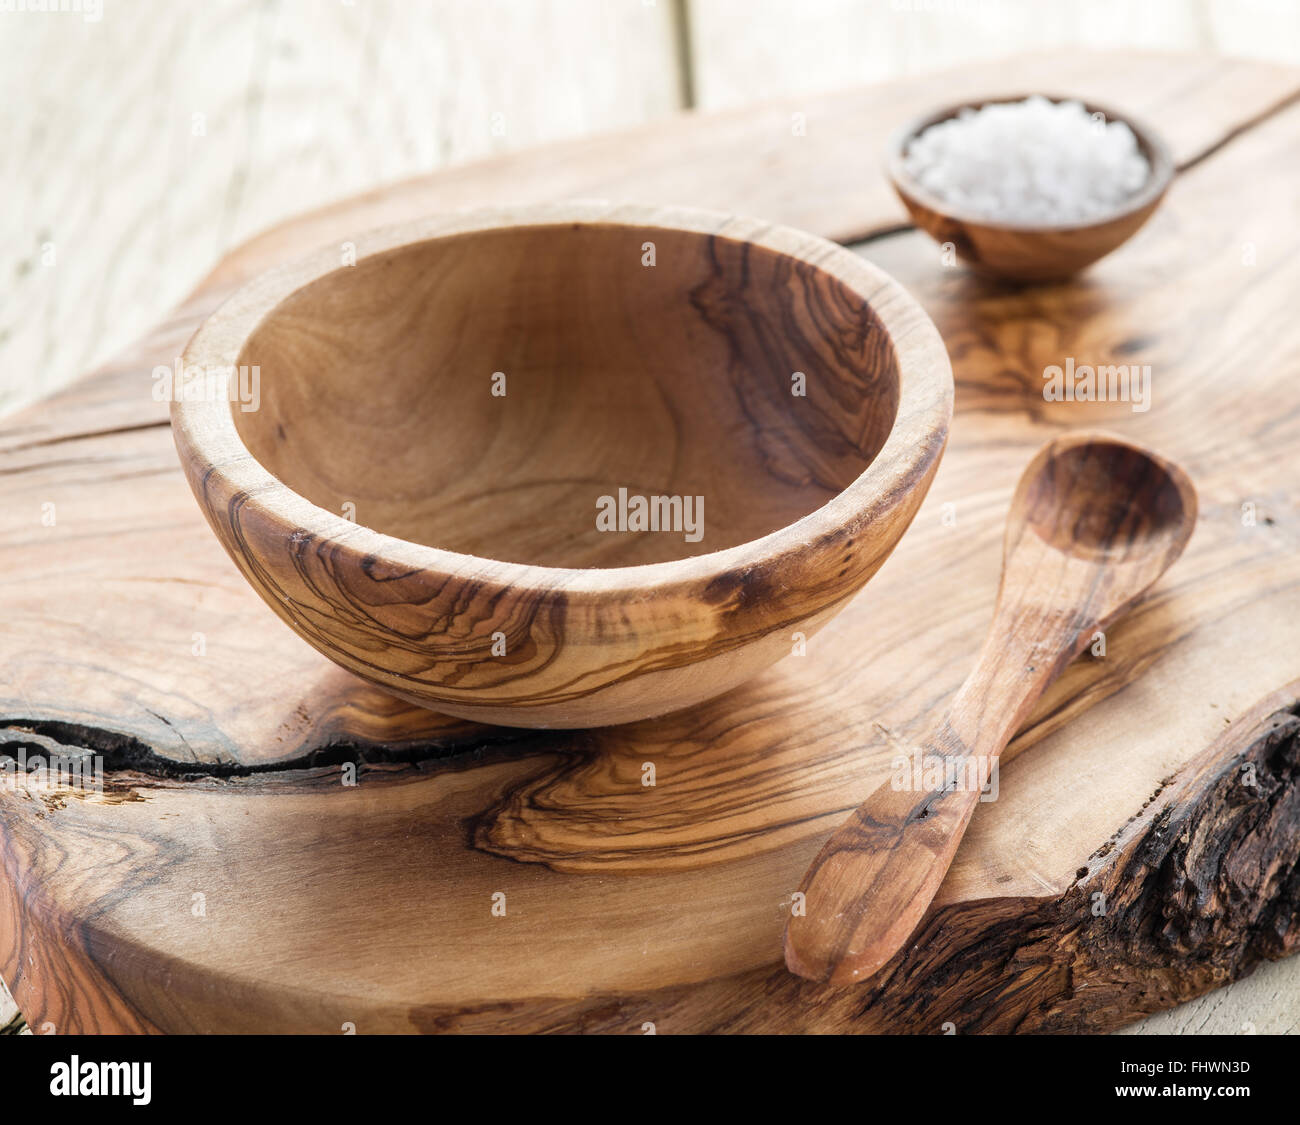 Empty wooden bowl on the service tray. Stock Photo